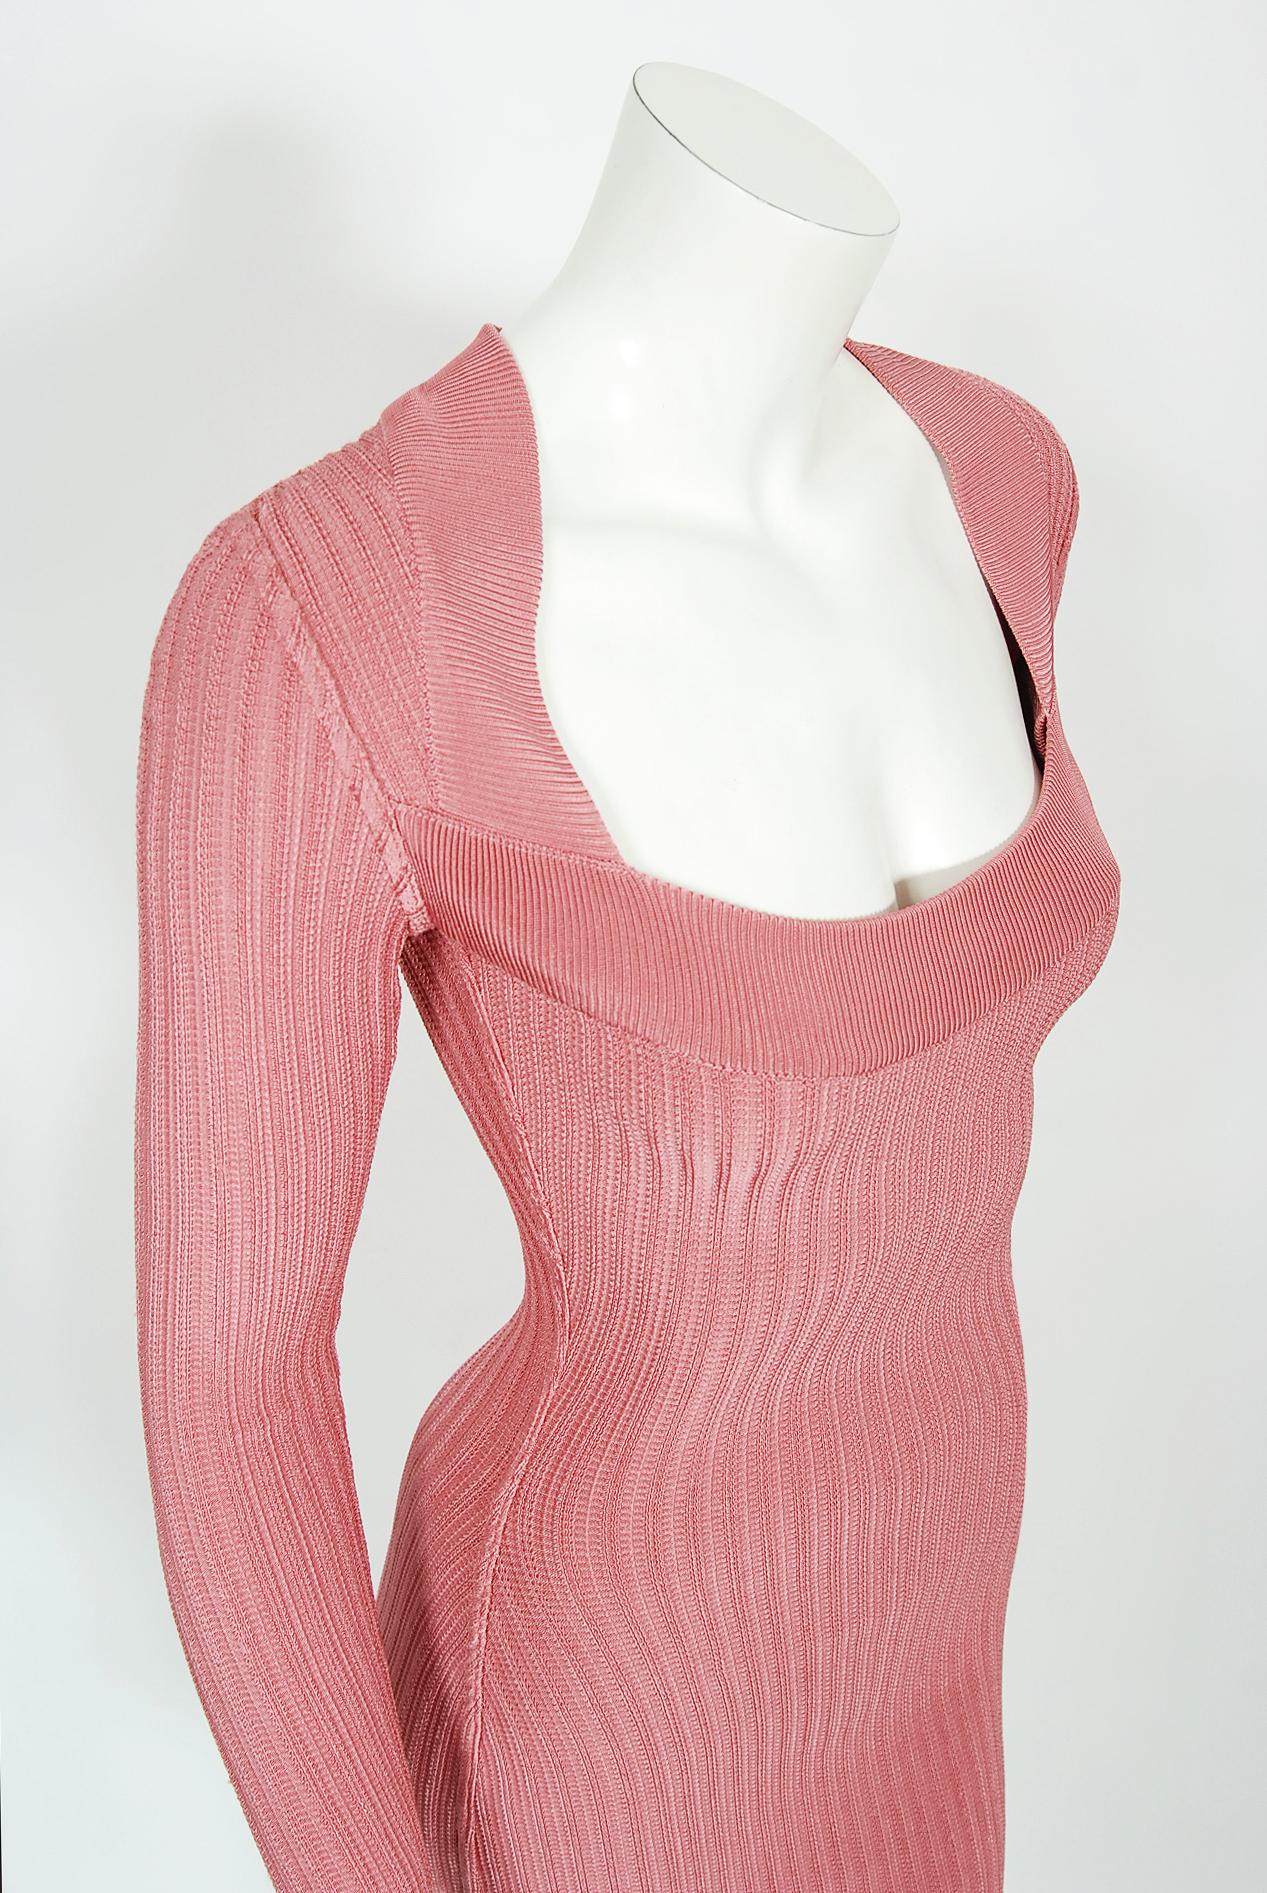 Vintage 1990 Azzedine Alaia Blush-Pink Ribbed Knit Long Sleeve Bodycon Dress For Sale 3